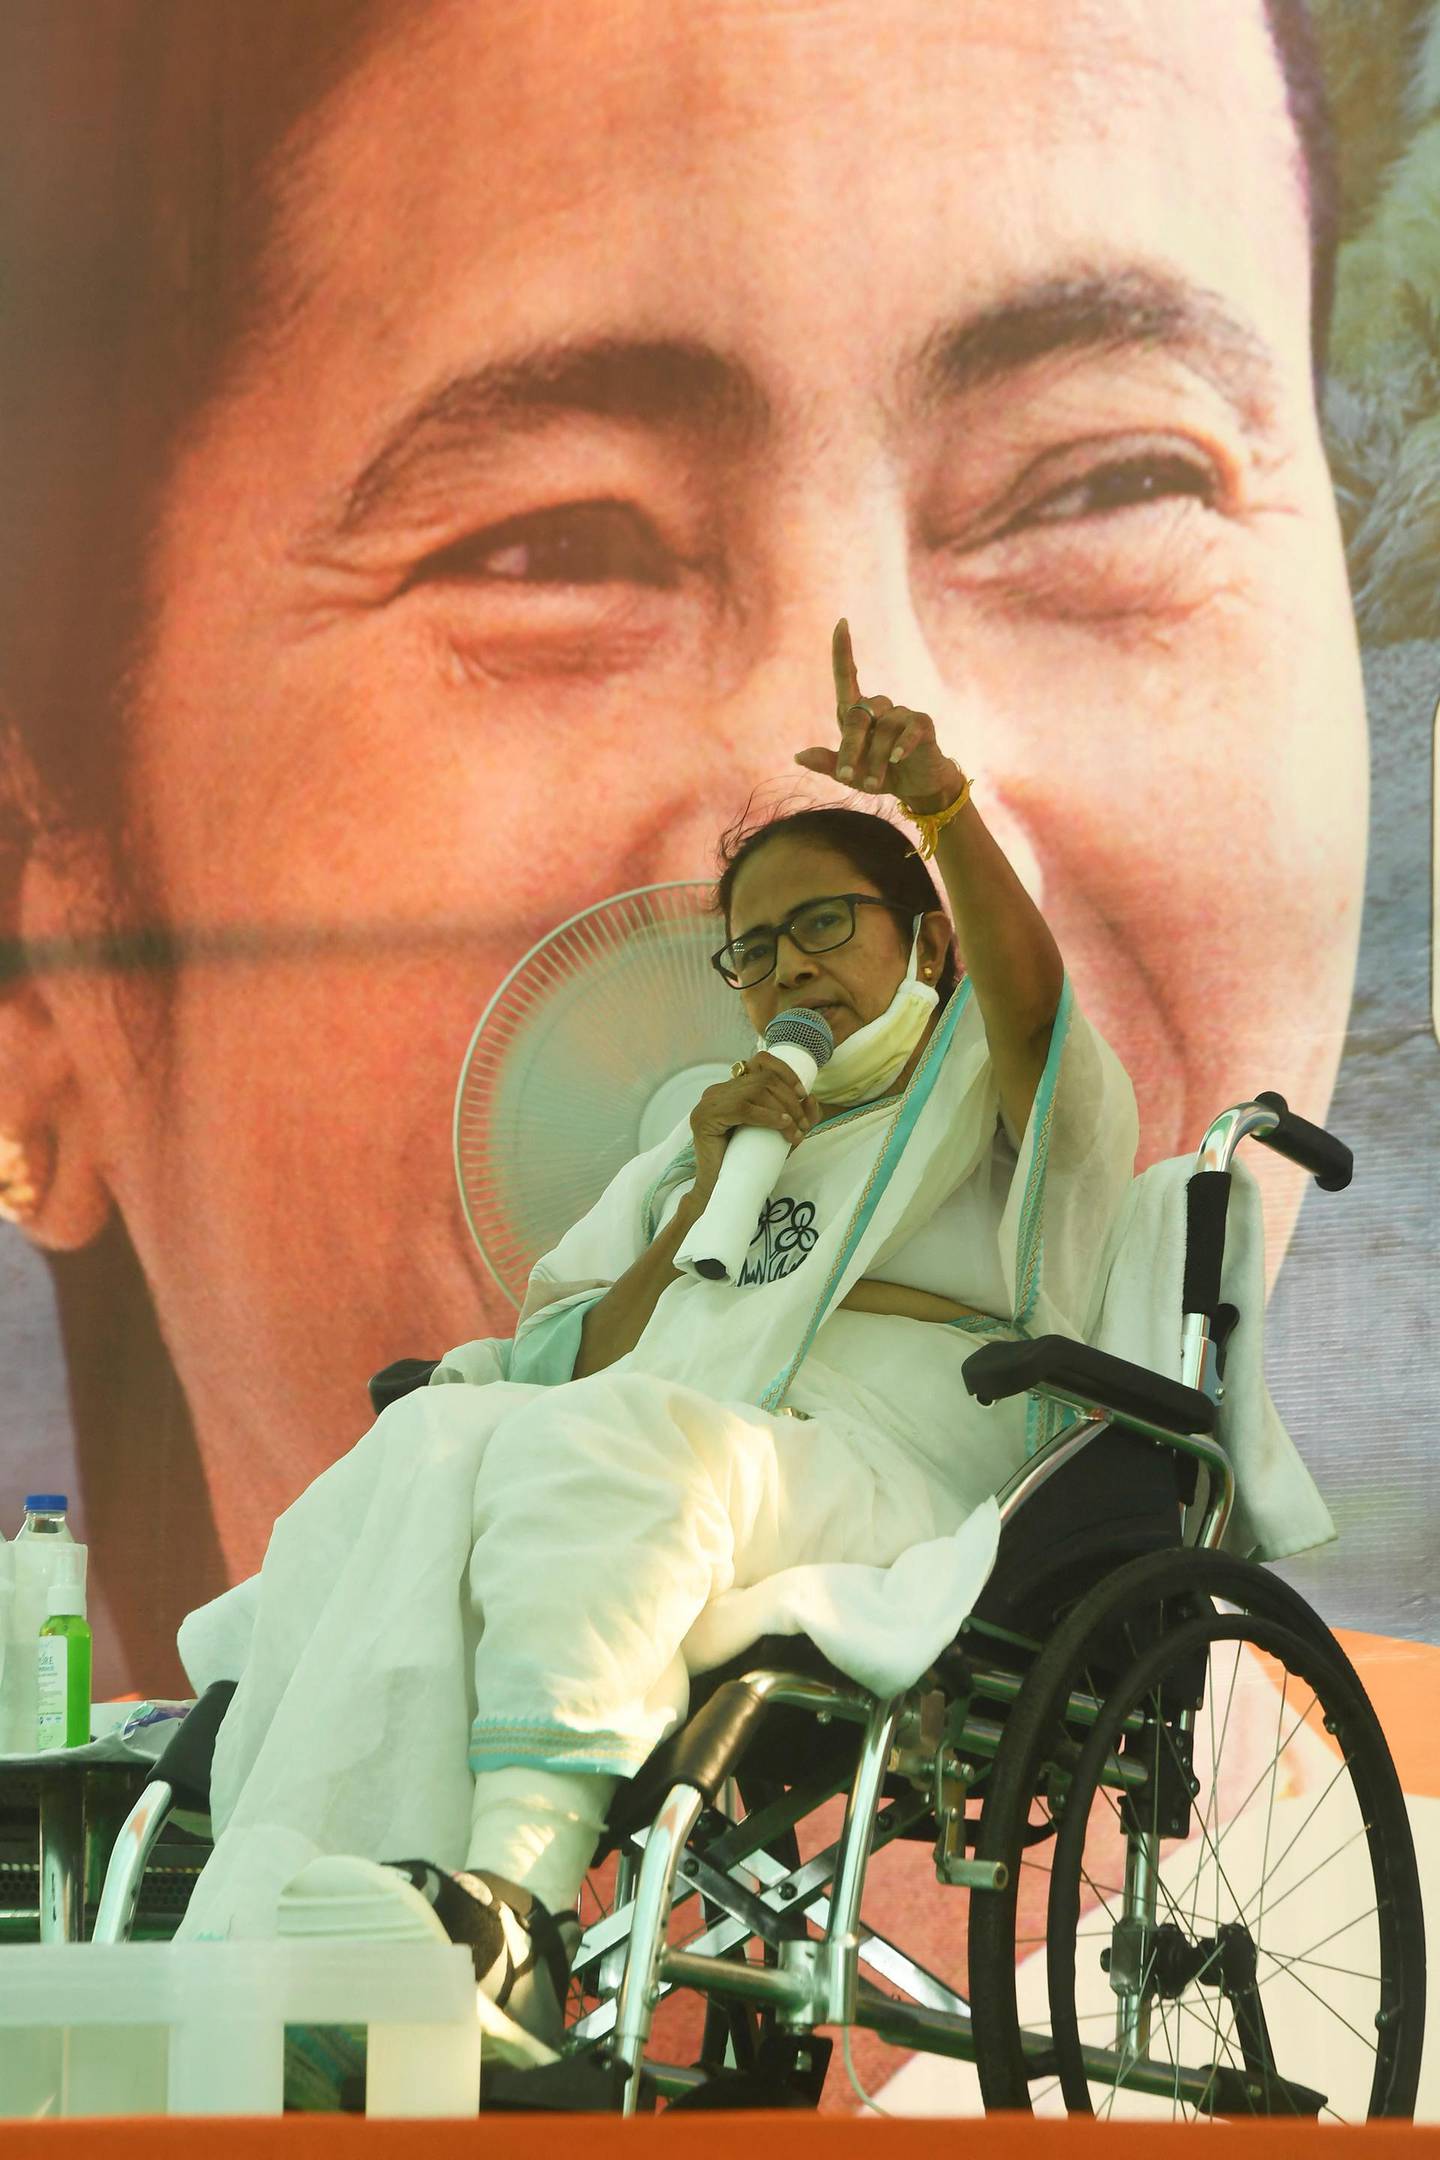 Chief Minister of West Bengal Mamata Banerjee addresses a public meeting during an election campaign at her constituency ahead of the 2nd phase of the state Legislative Assembly election in Nandigram around 160 kms west of Kolkata on March 30, 2021. (Photo by Dibyangshu SARKAR / AFP)